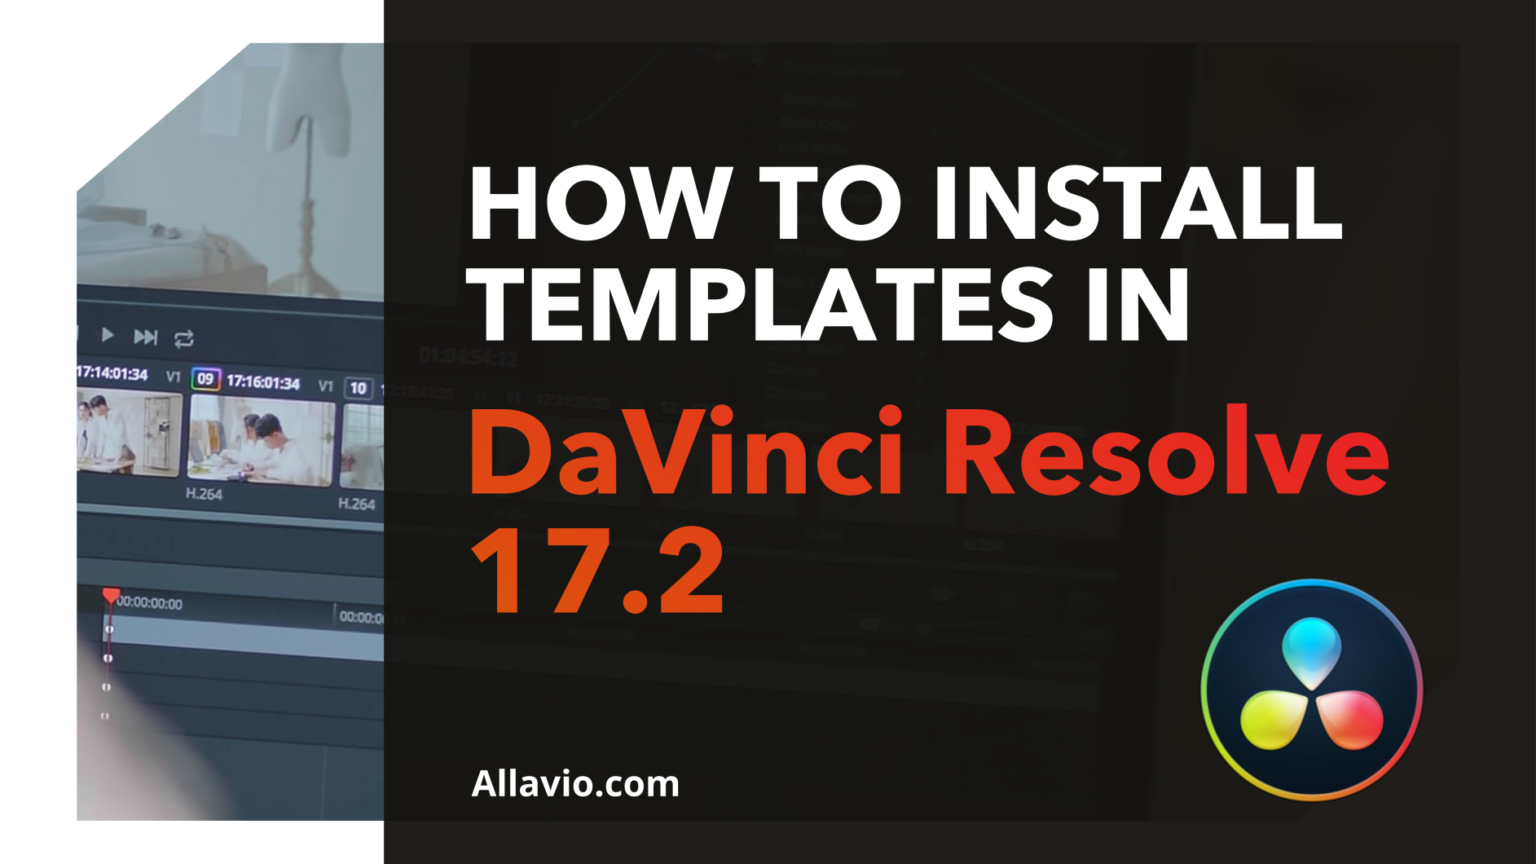 How to Install Templates in DaVinci Resolve 17.2 Tutorial Guide